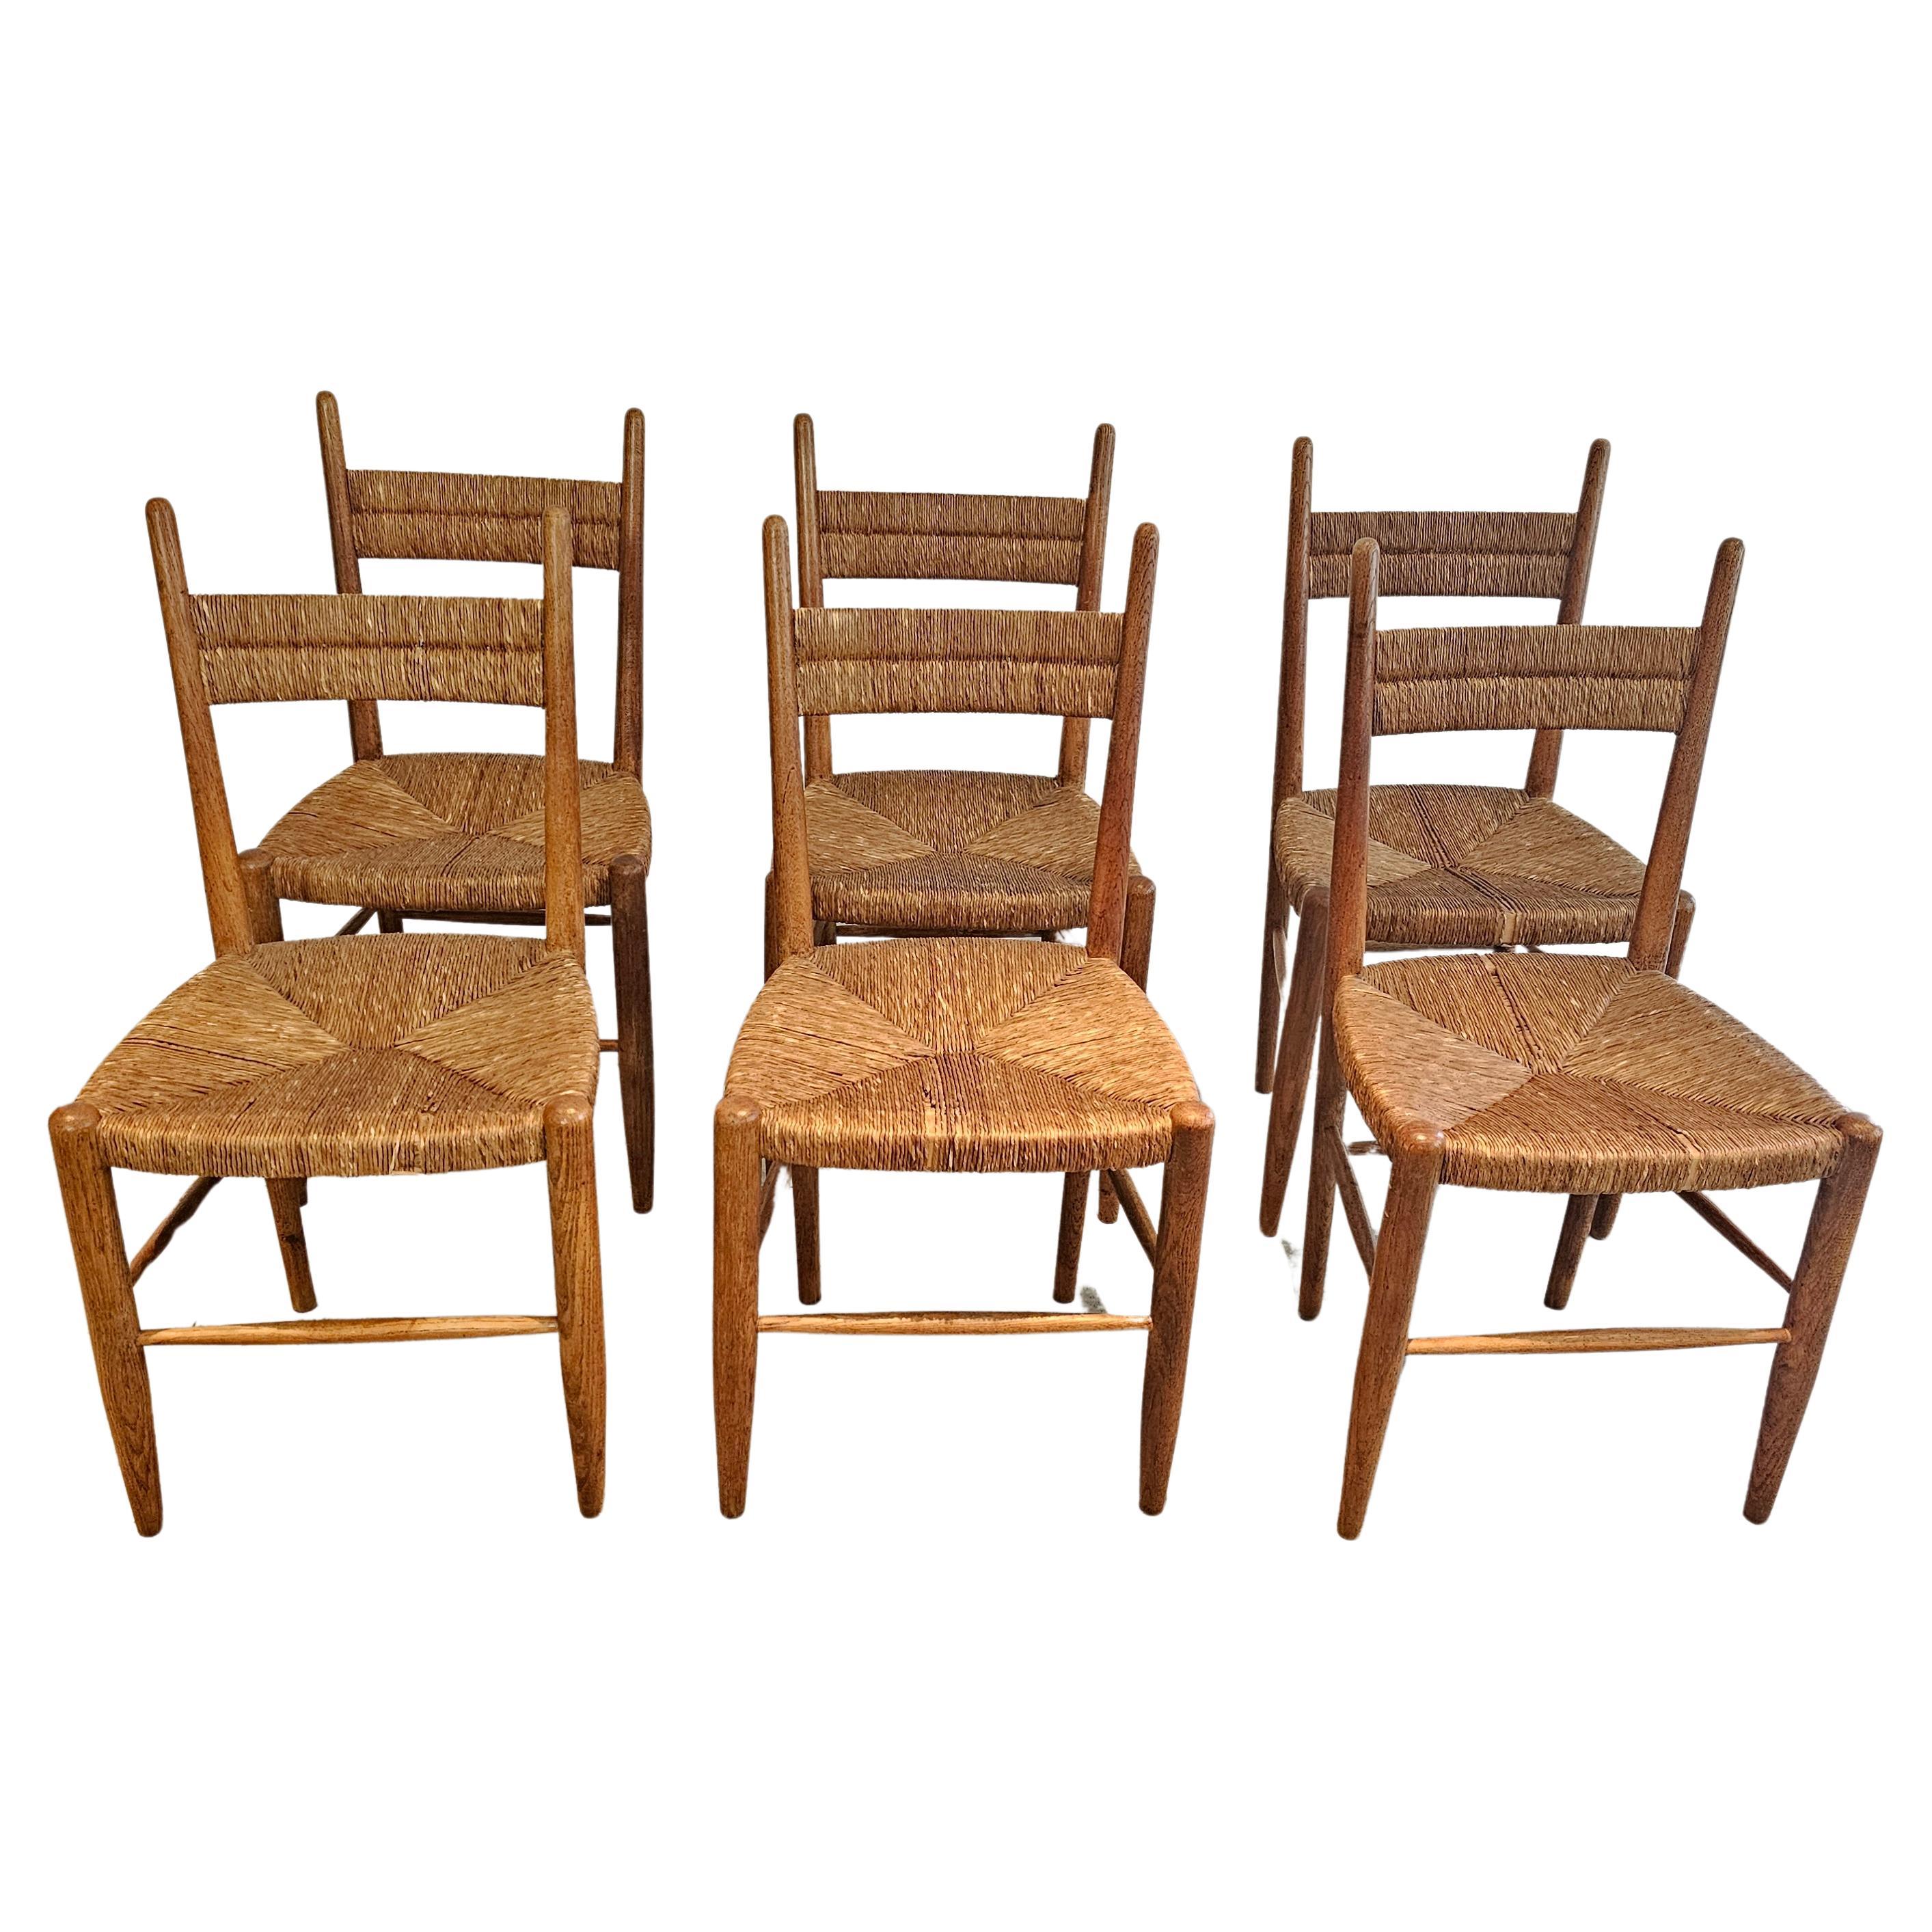 Set of 6 French Chairs in Teak and straw Woven Seatings For Sale